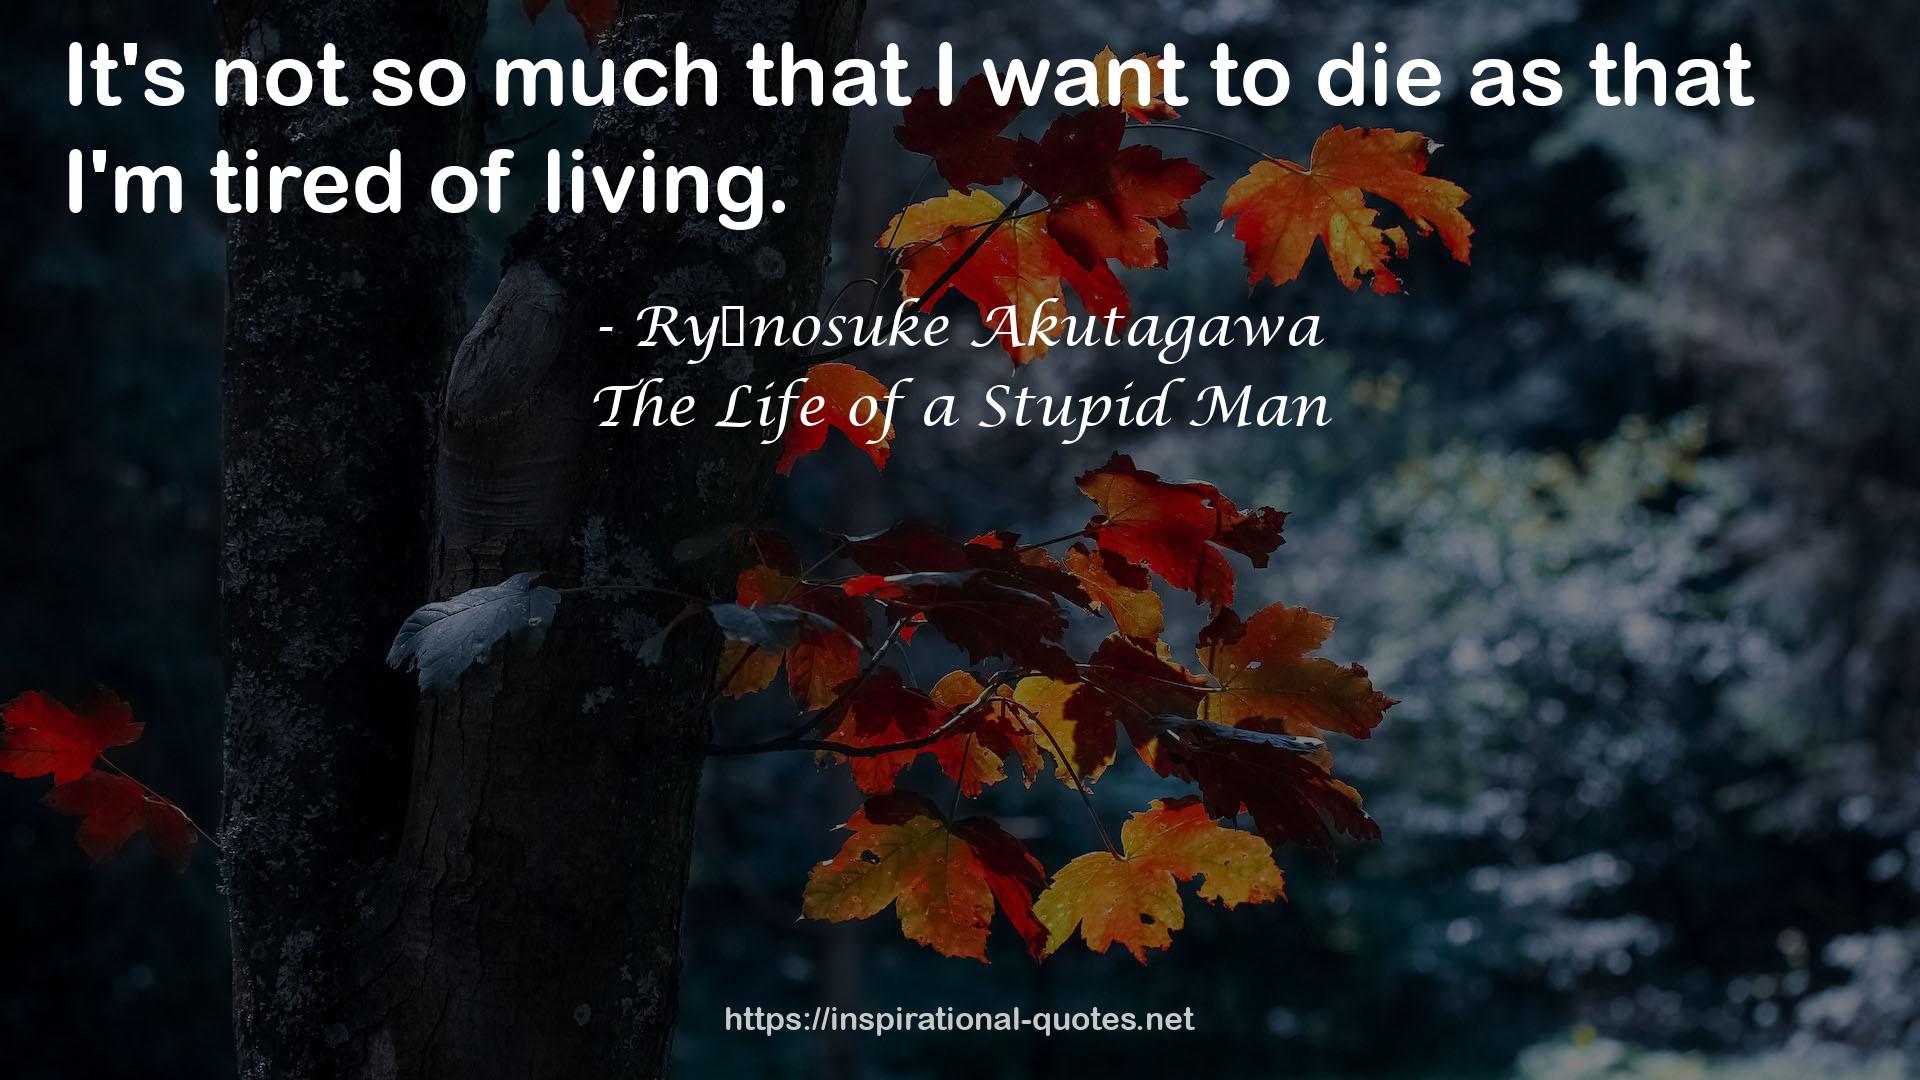 The Life of a Stupid Man QUOTES